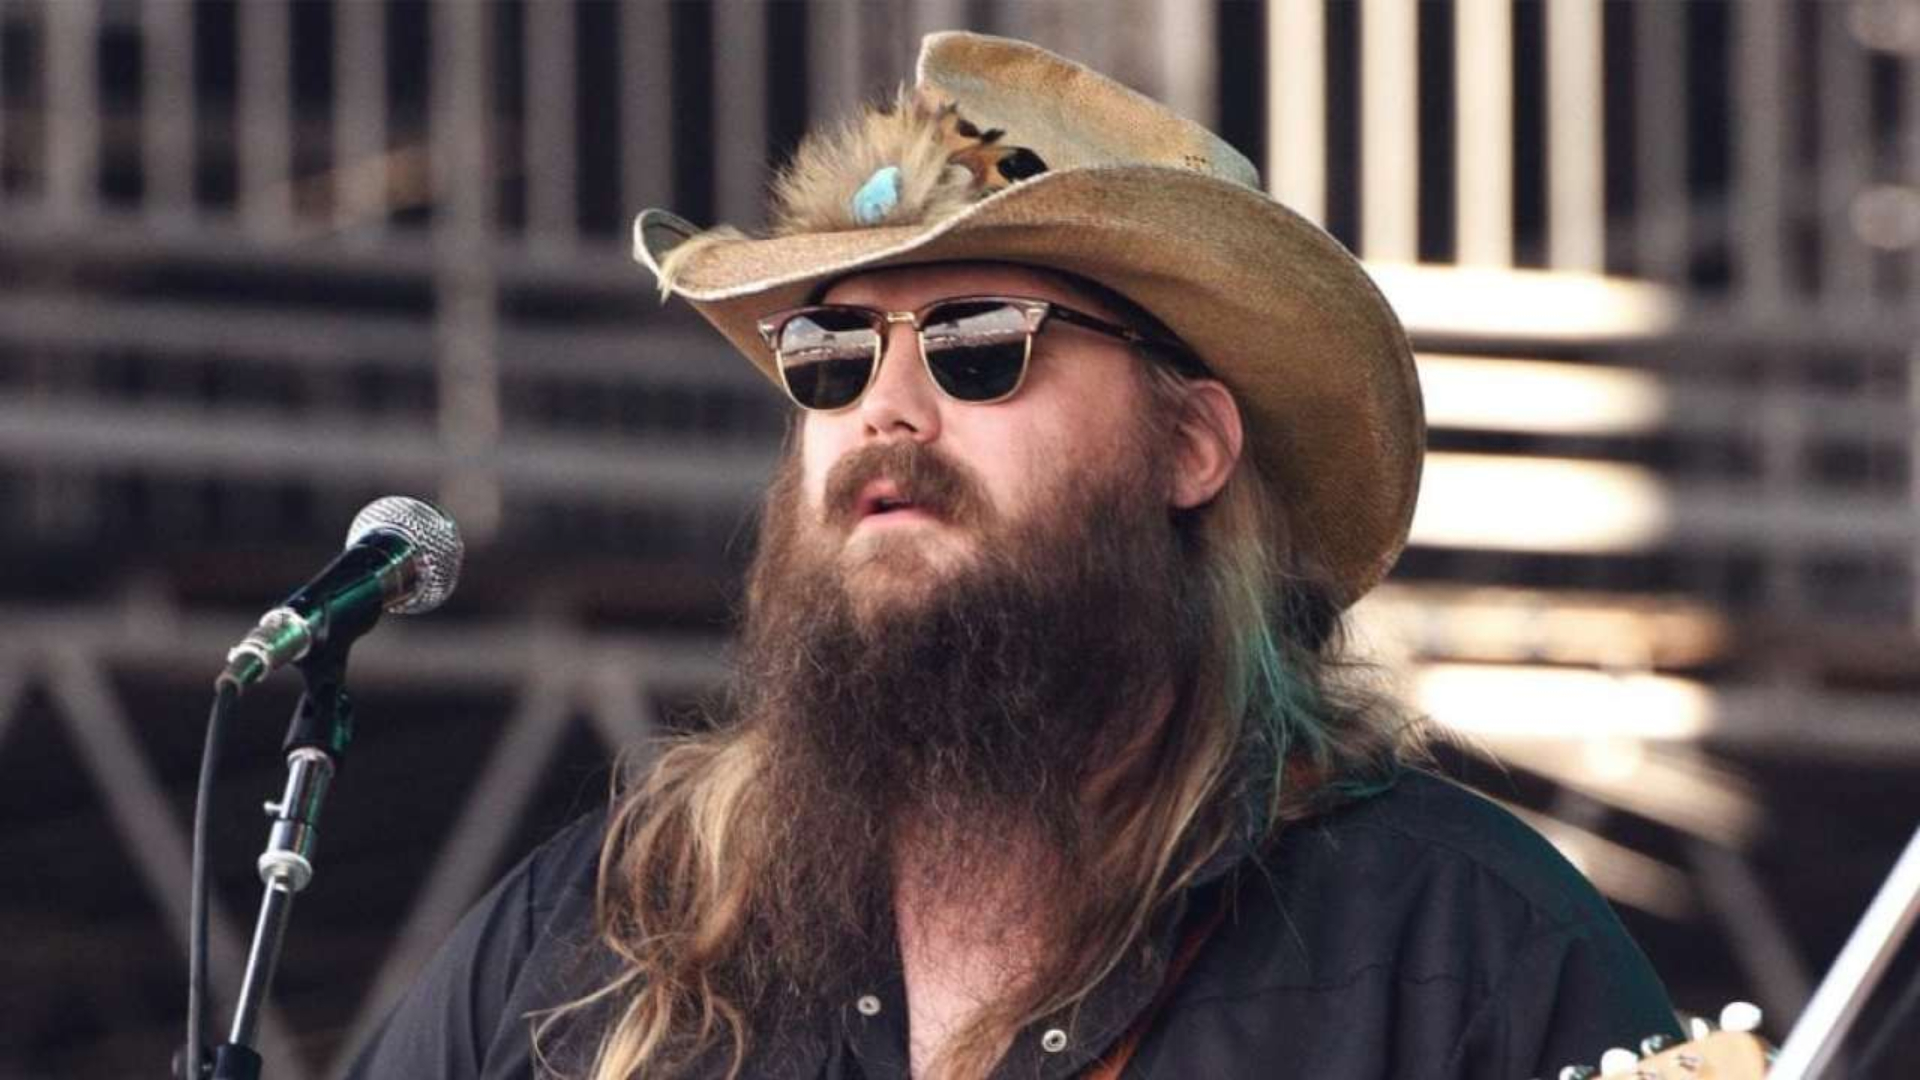 Chris Stapleton to headline first event at Globe Life Field in